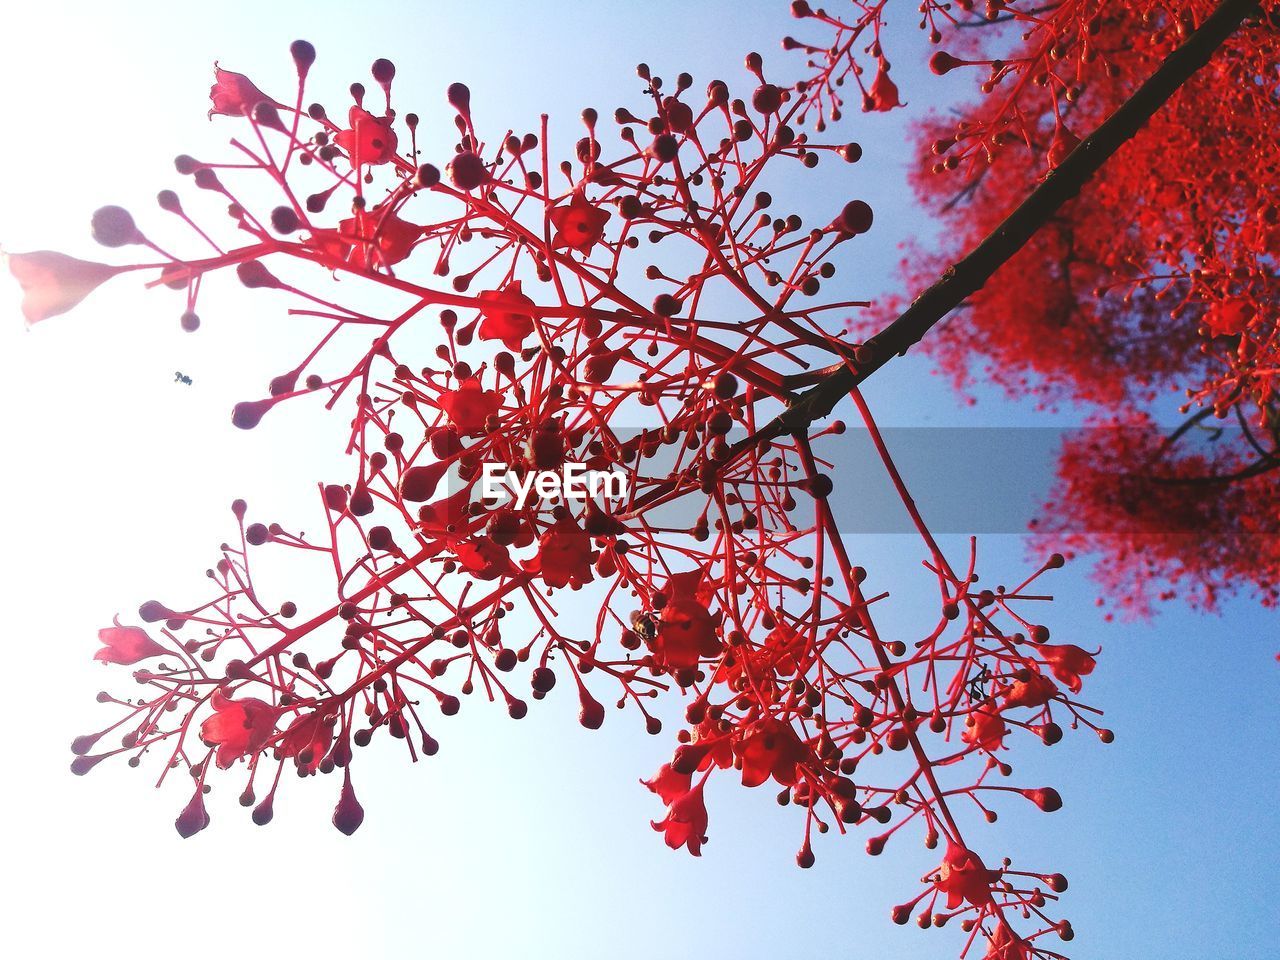 LOW ANGLE VIEW OF RED FLOWERING PLANT AGAINST SKY